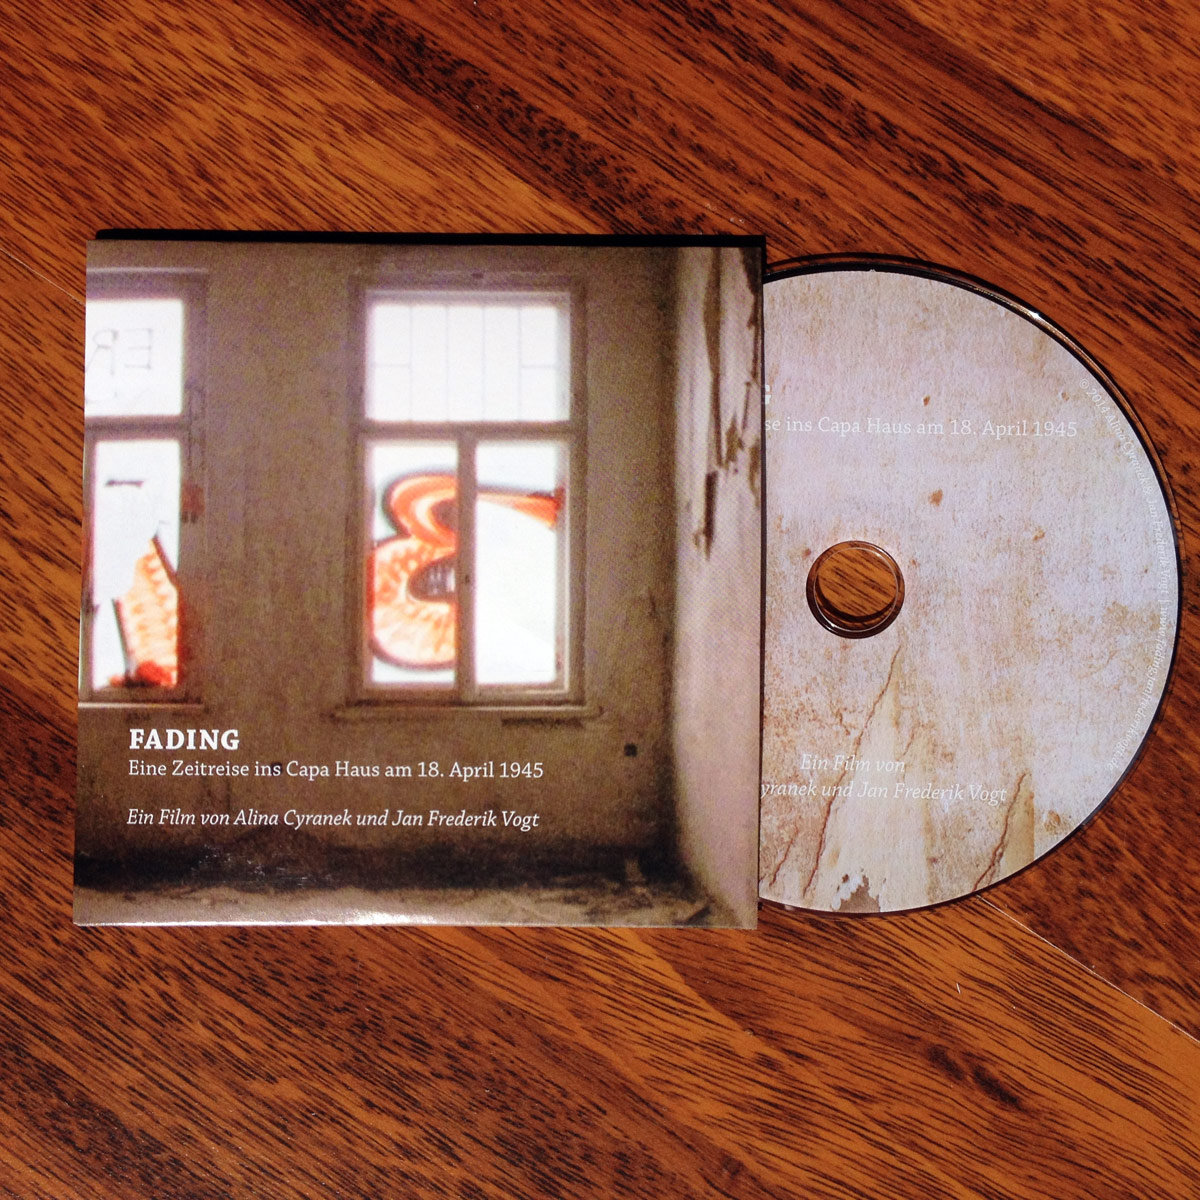 Fading DVD Cover CD